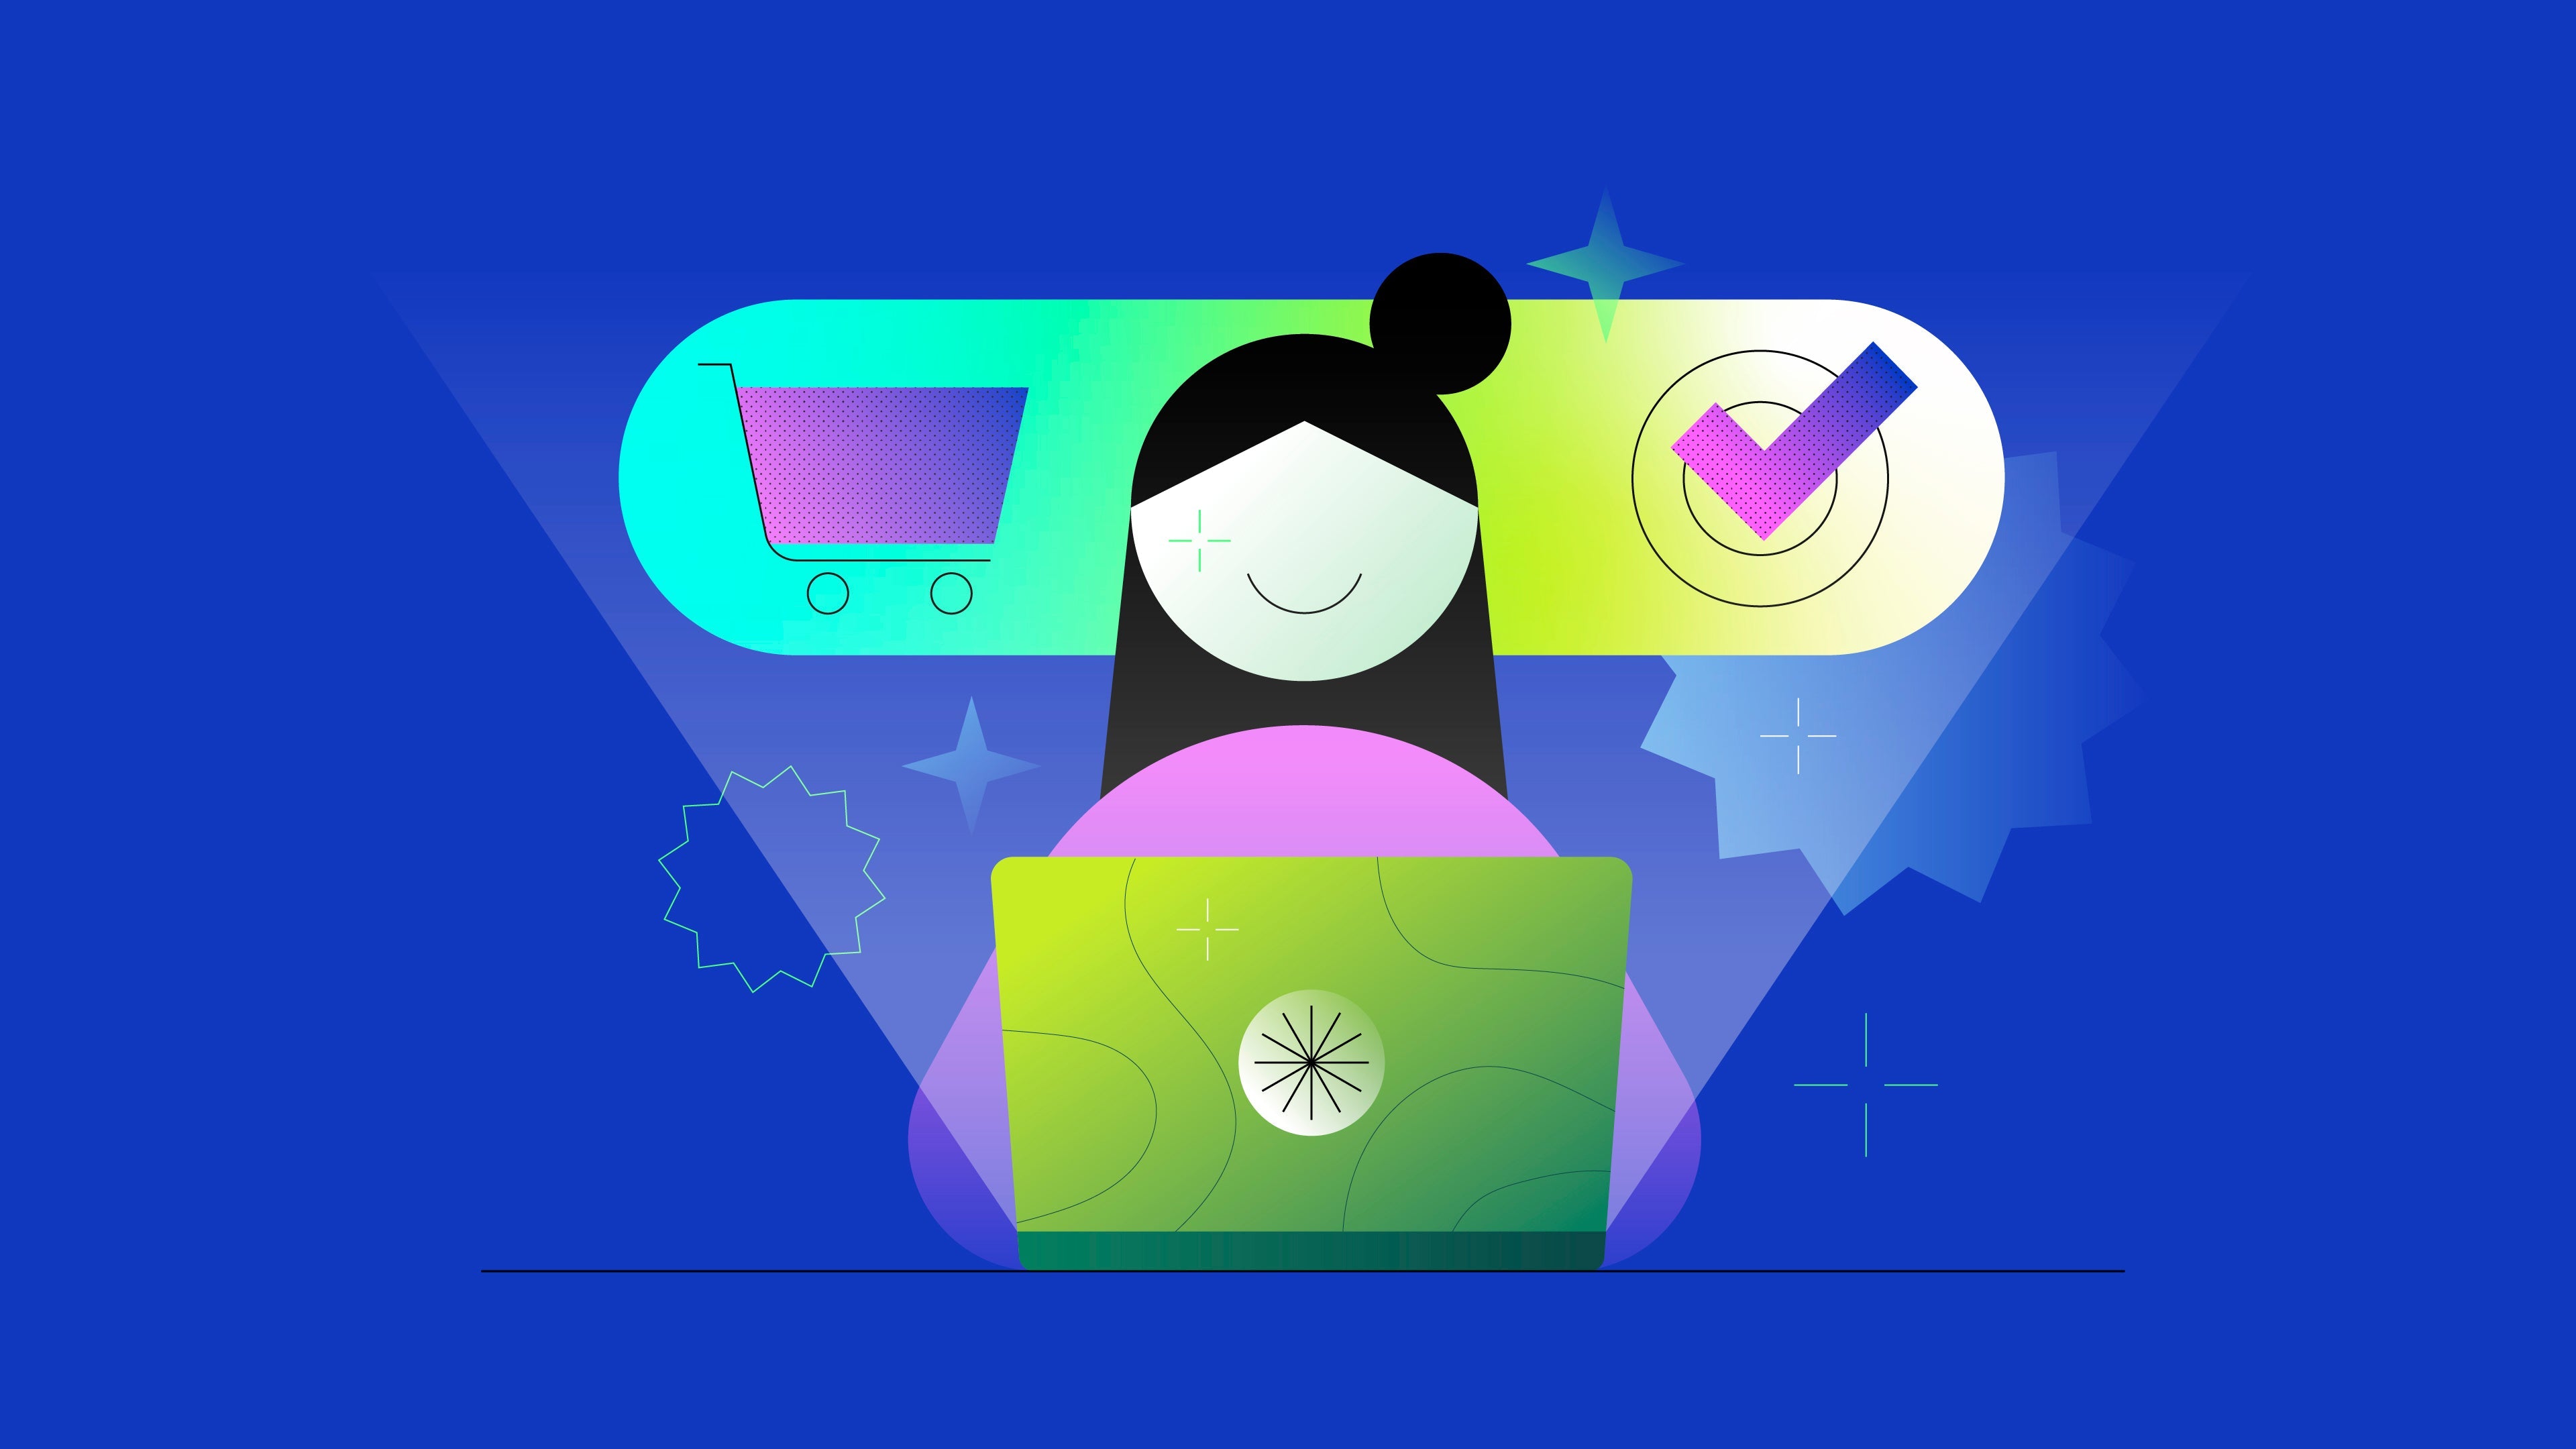 Stylized female avatar with shopping icons like a cart and check mark, set against a vibrant blue and green abstract background.